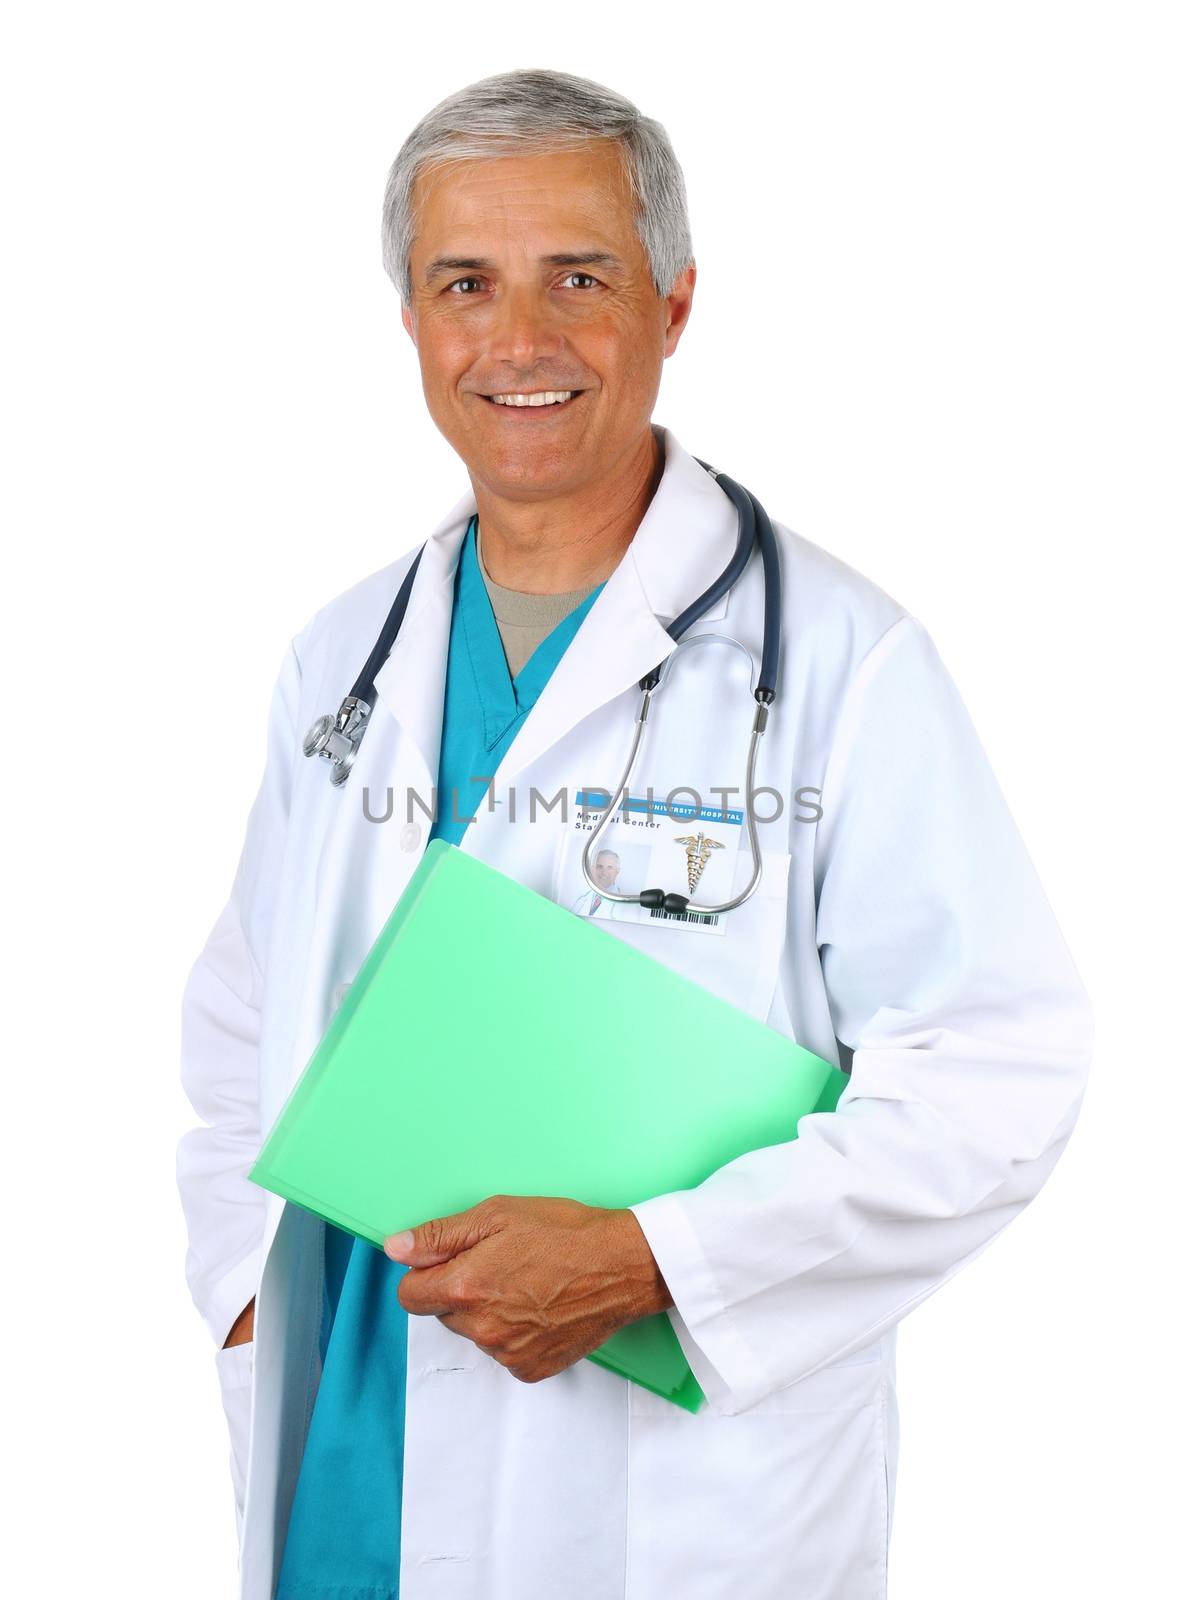 Smiling middle aged doctor holding a patients chart. Man is wearing a lab coat and scrubs with  stethoscope around his neck. Vertical format on a white background.